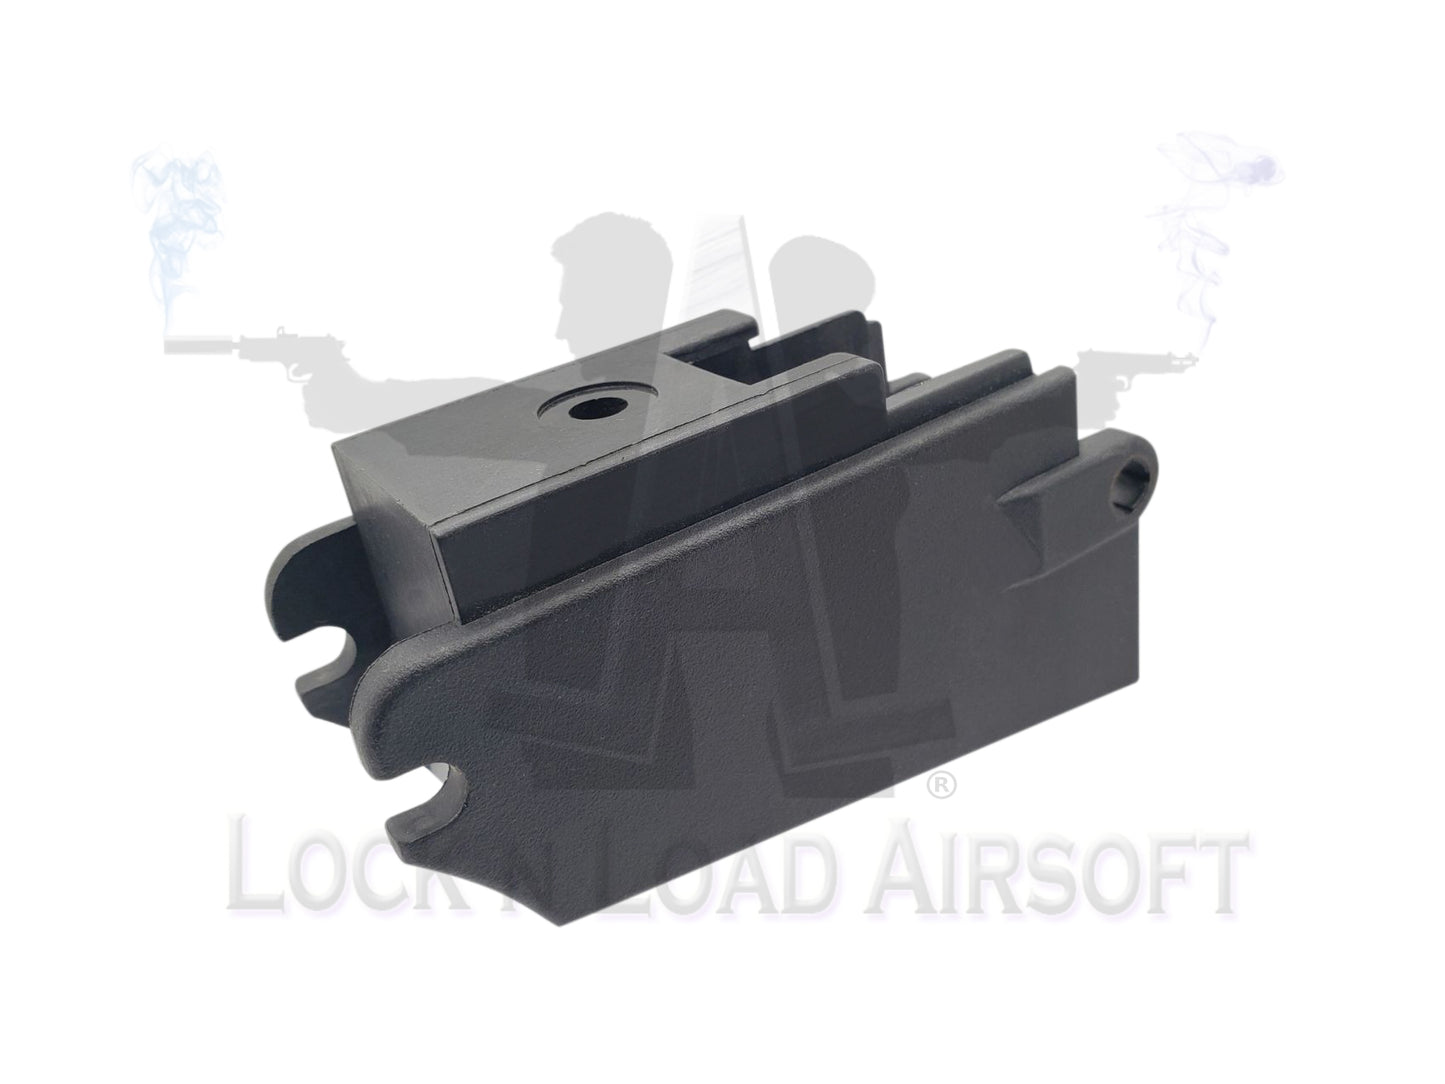 G36 Polymer Magwell Replacement